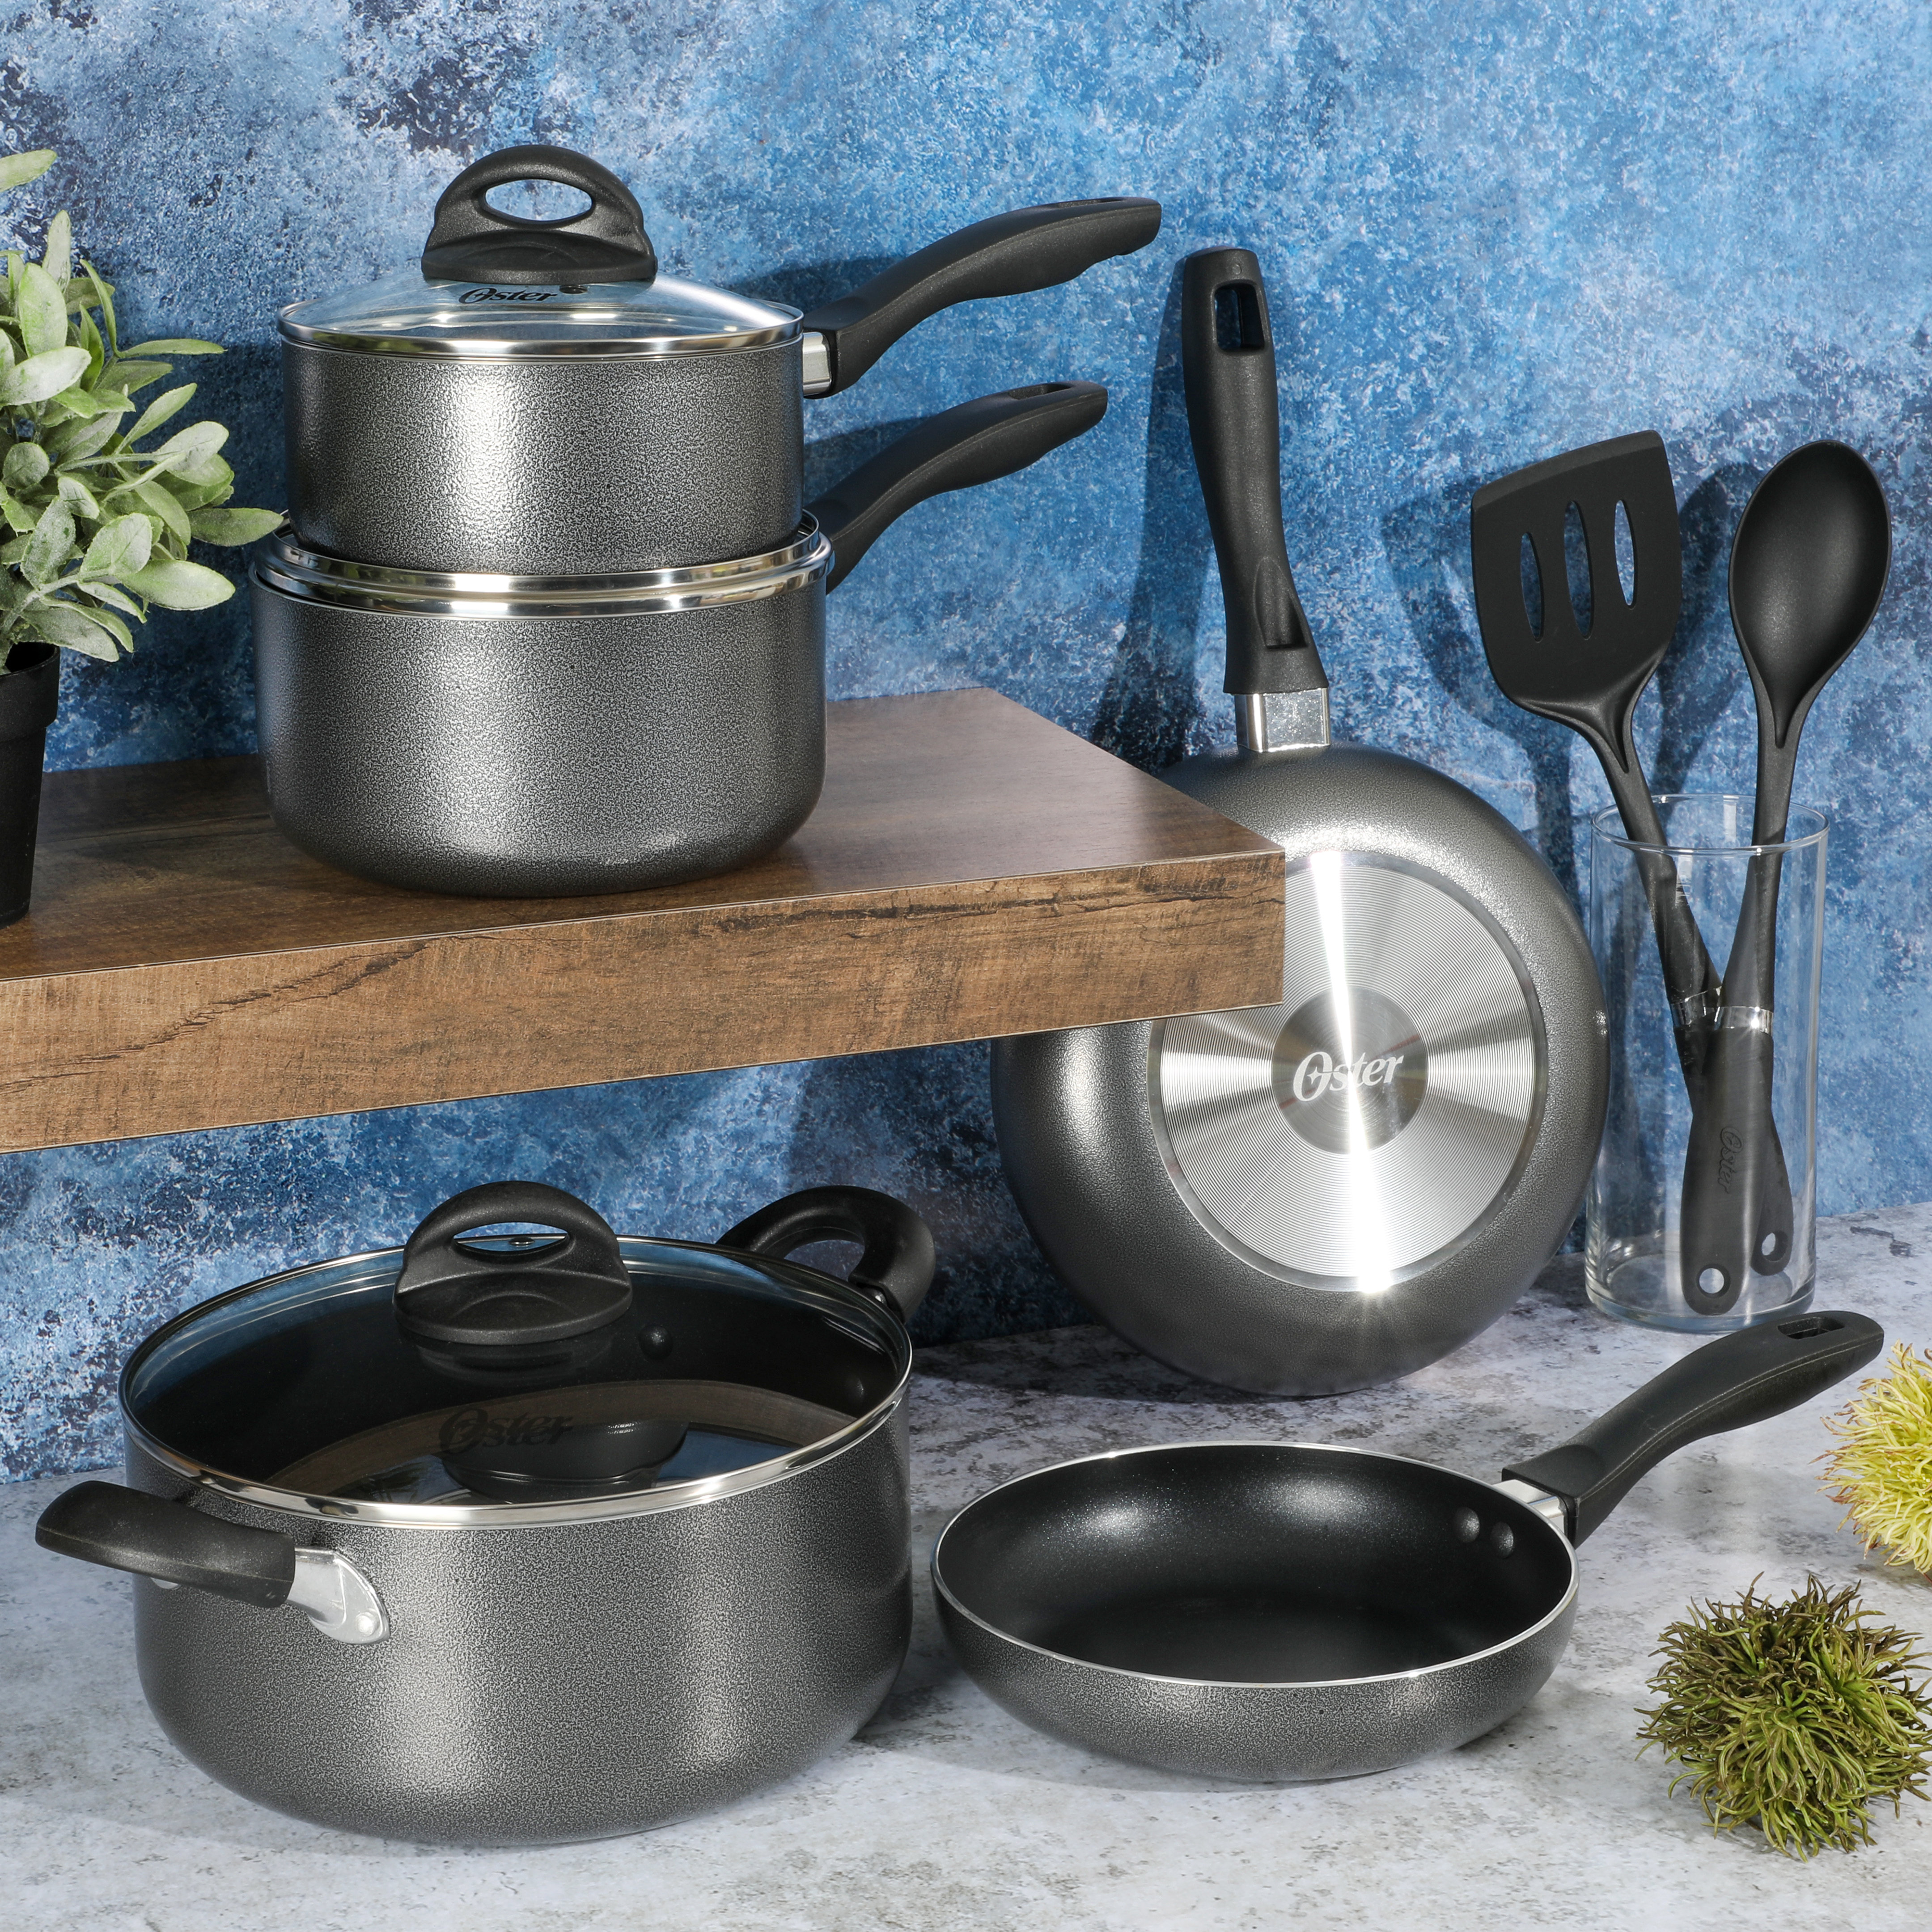 BergHOFF Stone 11Pc Non-stick Cookware Set With Glass Lids